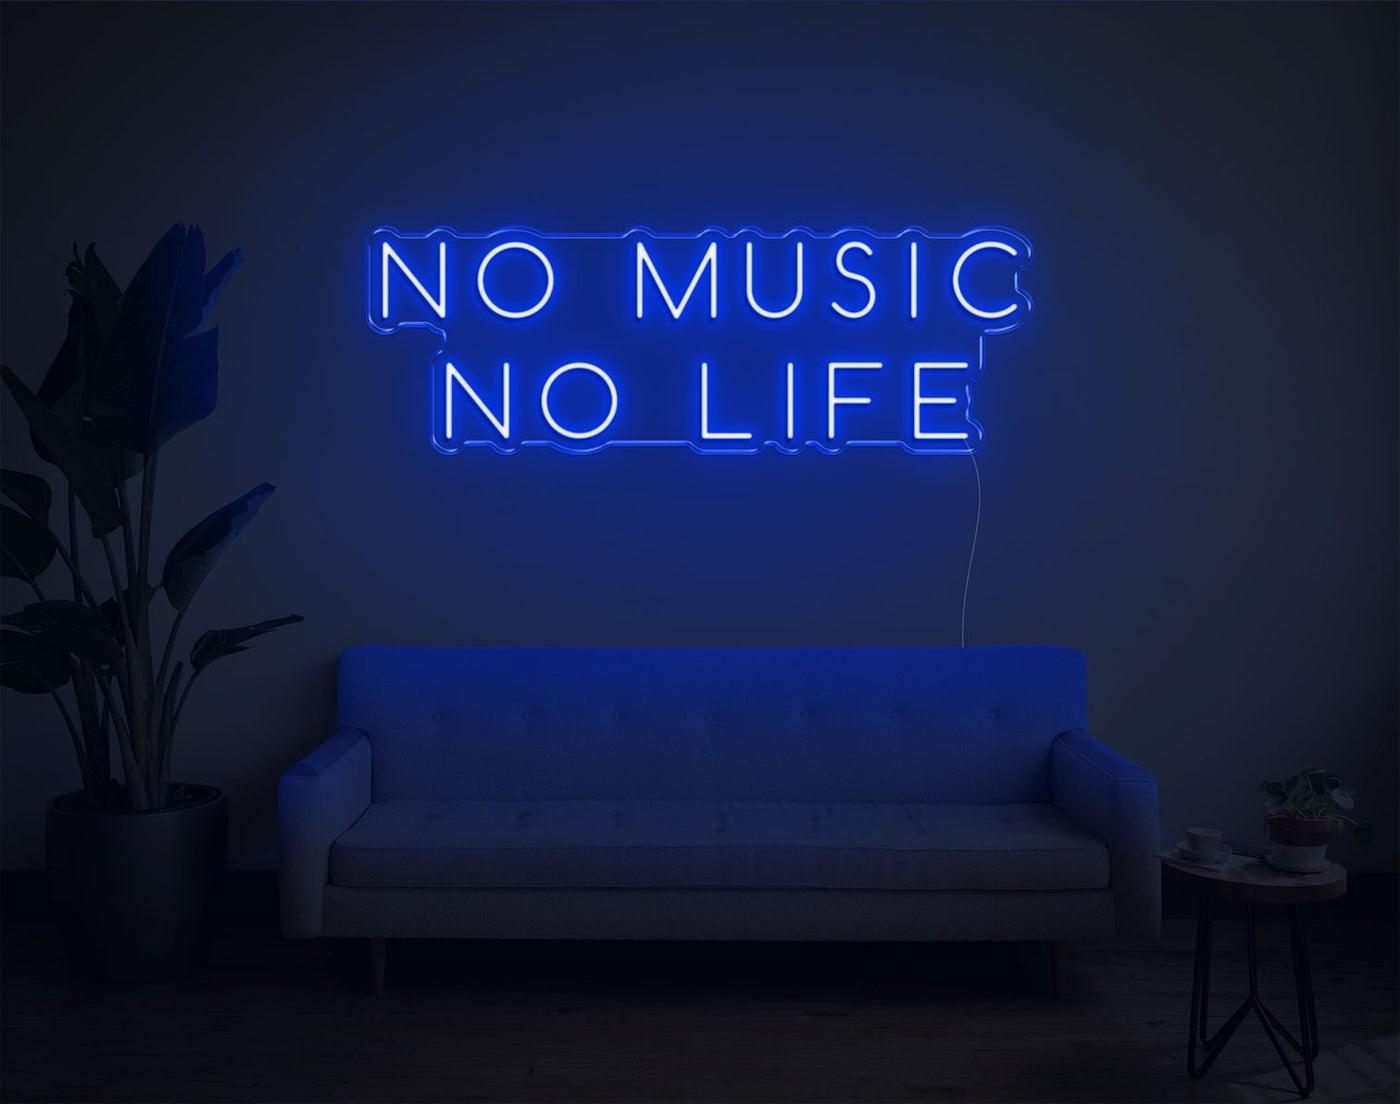 No Music No Life LED Neon Sign - 12inch x 34inchBlue